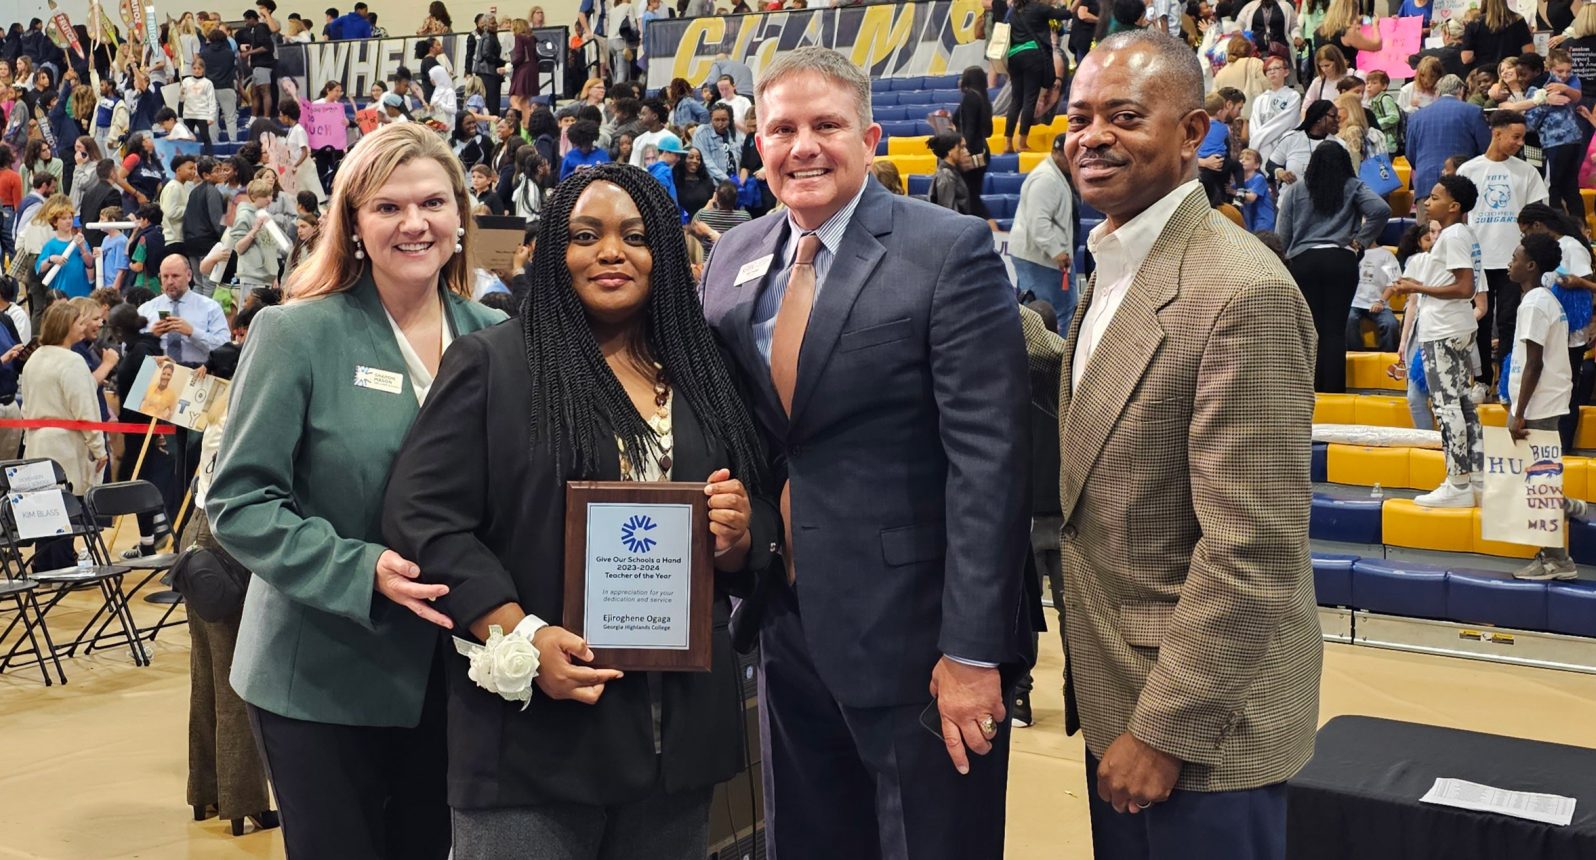 From left, Chamber of Commerce CEO Sharon Mason, GHC Assistant Professor of Biology Ejiroghene Ogaga, GHC President Dr. Mike Hobbs and Marietta Campus Dean Ken Reaves.